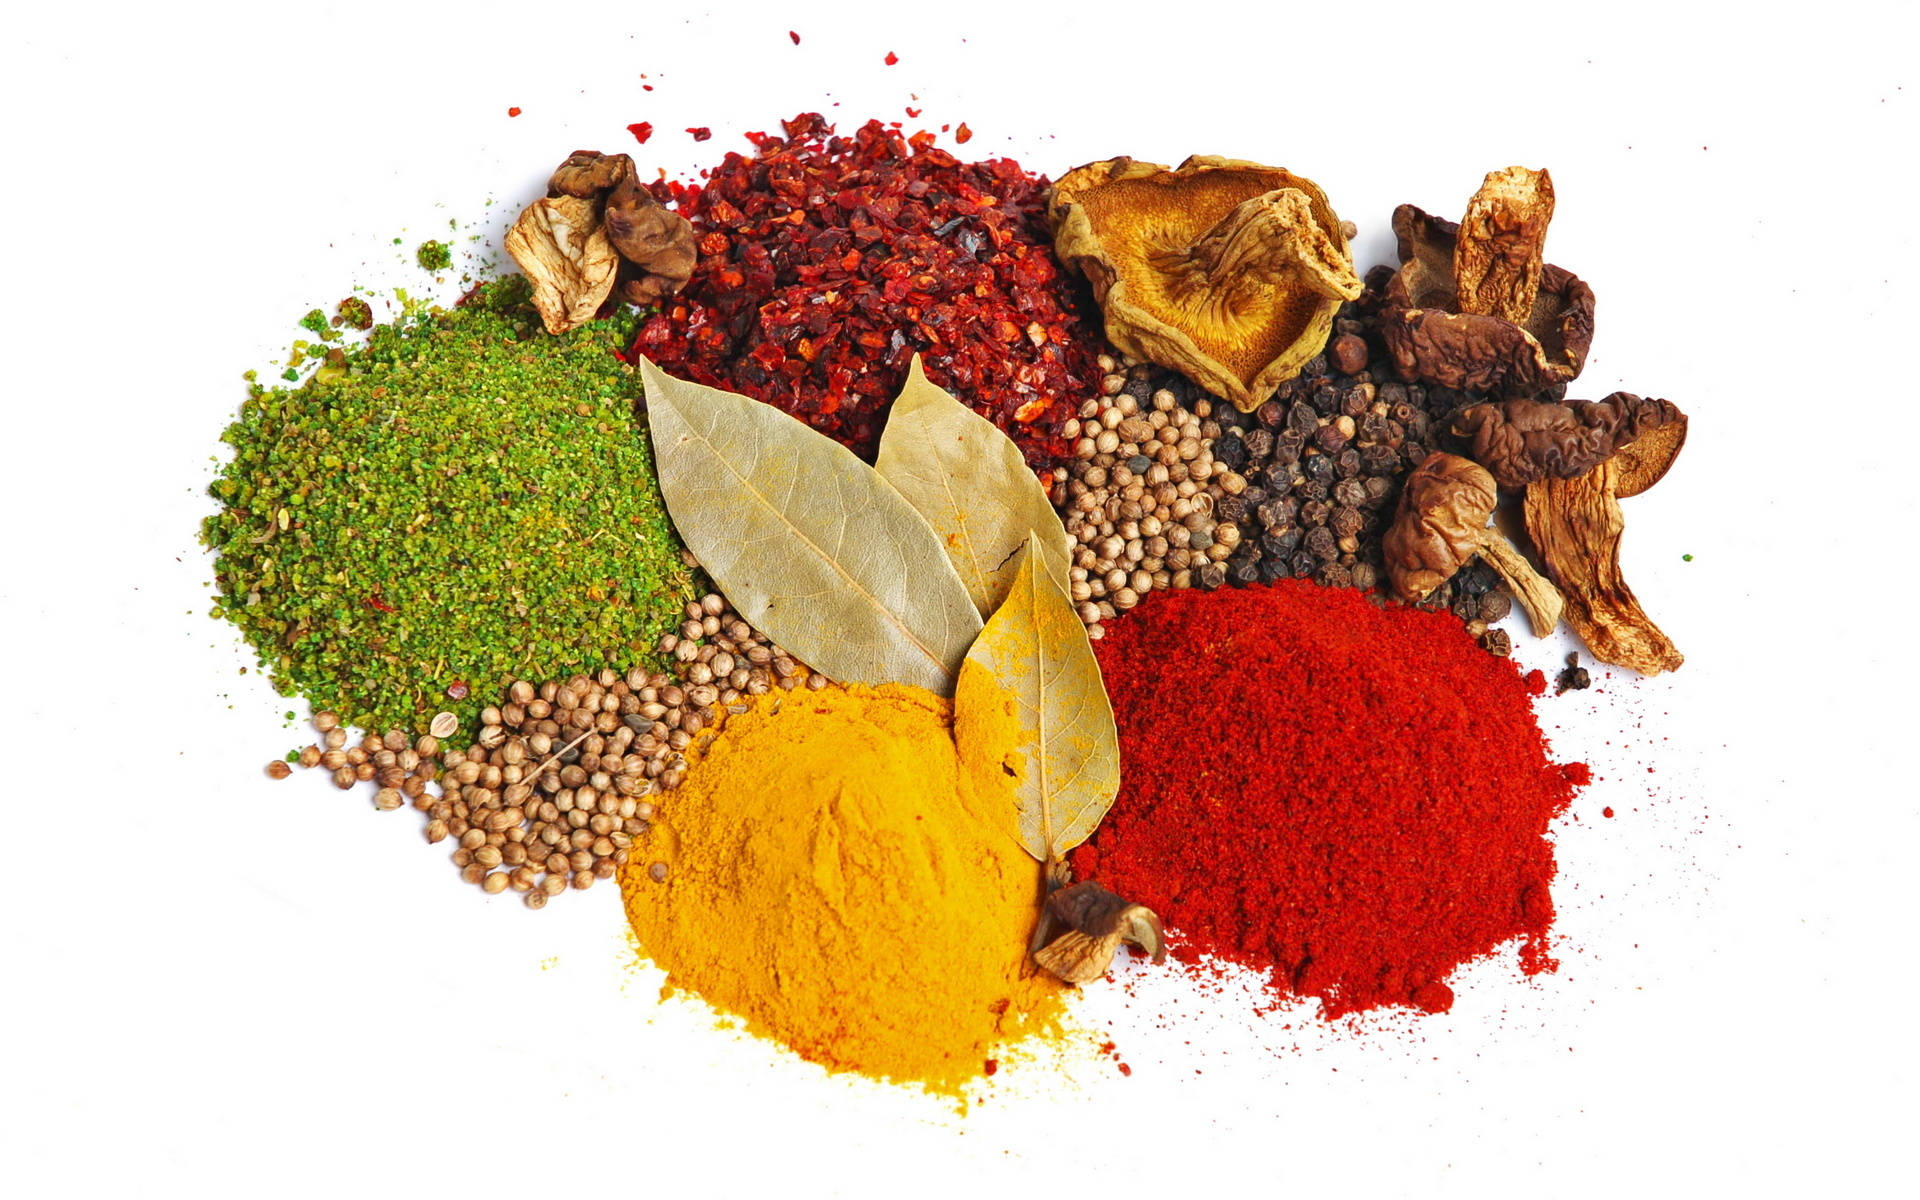 Abundance of Whole Dried Spices and Herbs Wallpaper